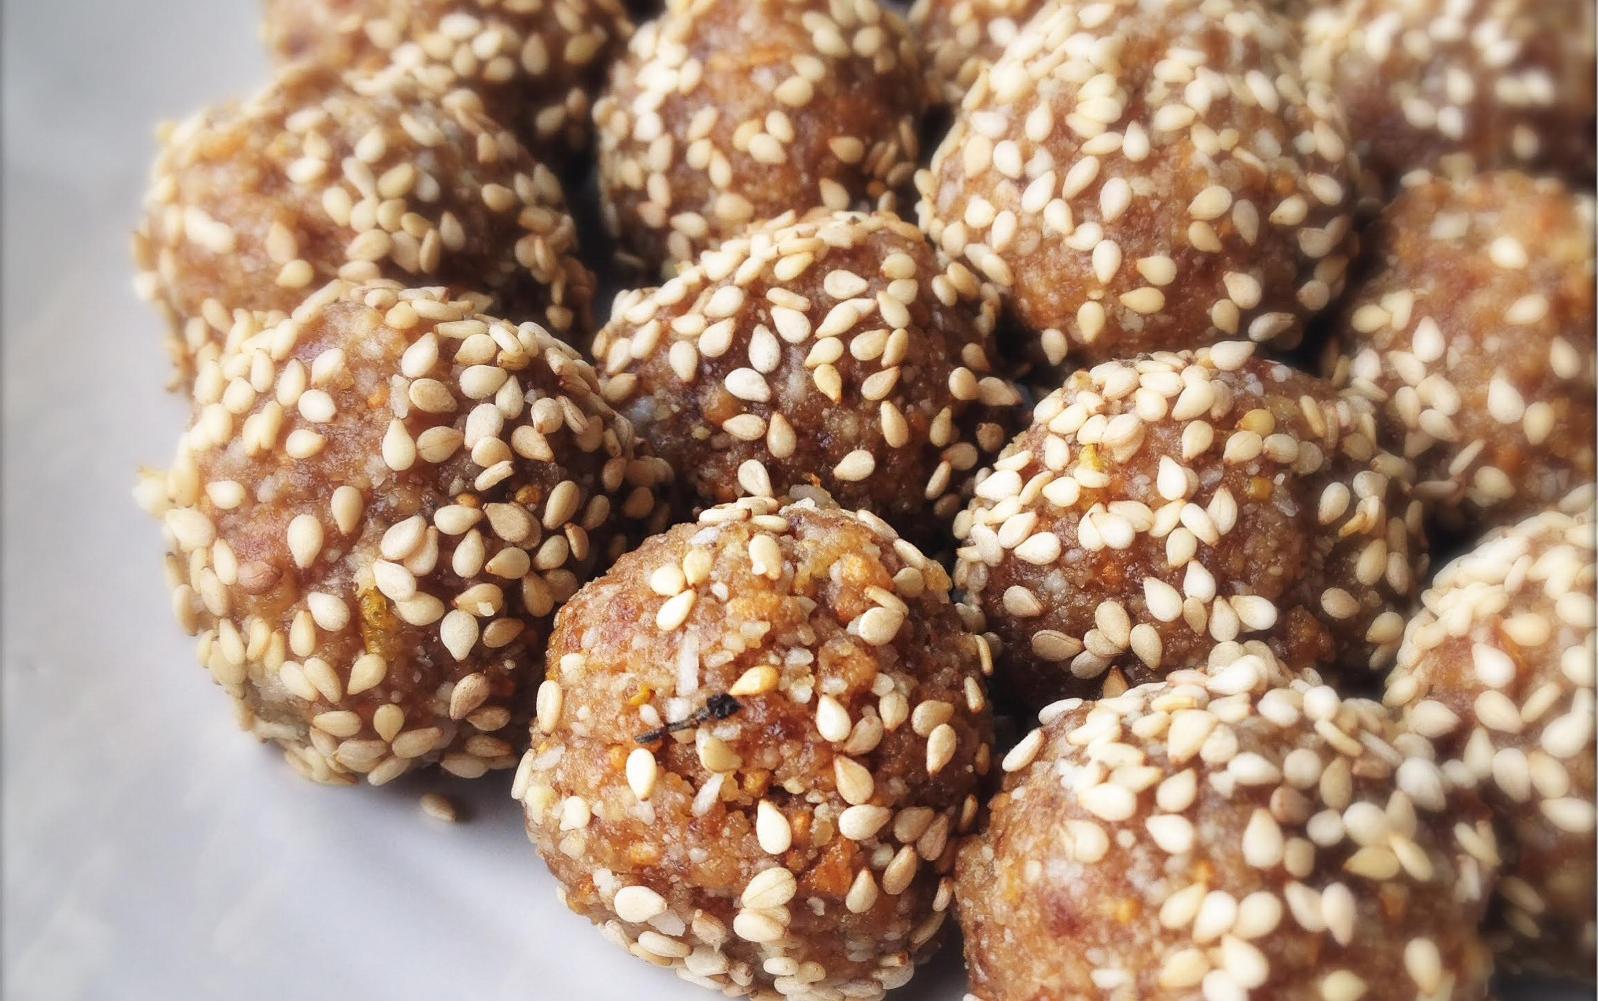  If you love sesame seeds, you'll be head over heels for these vegan